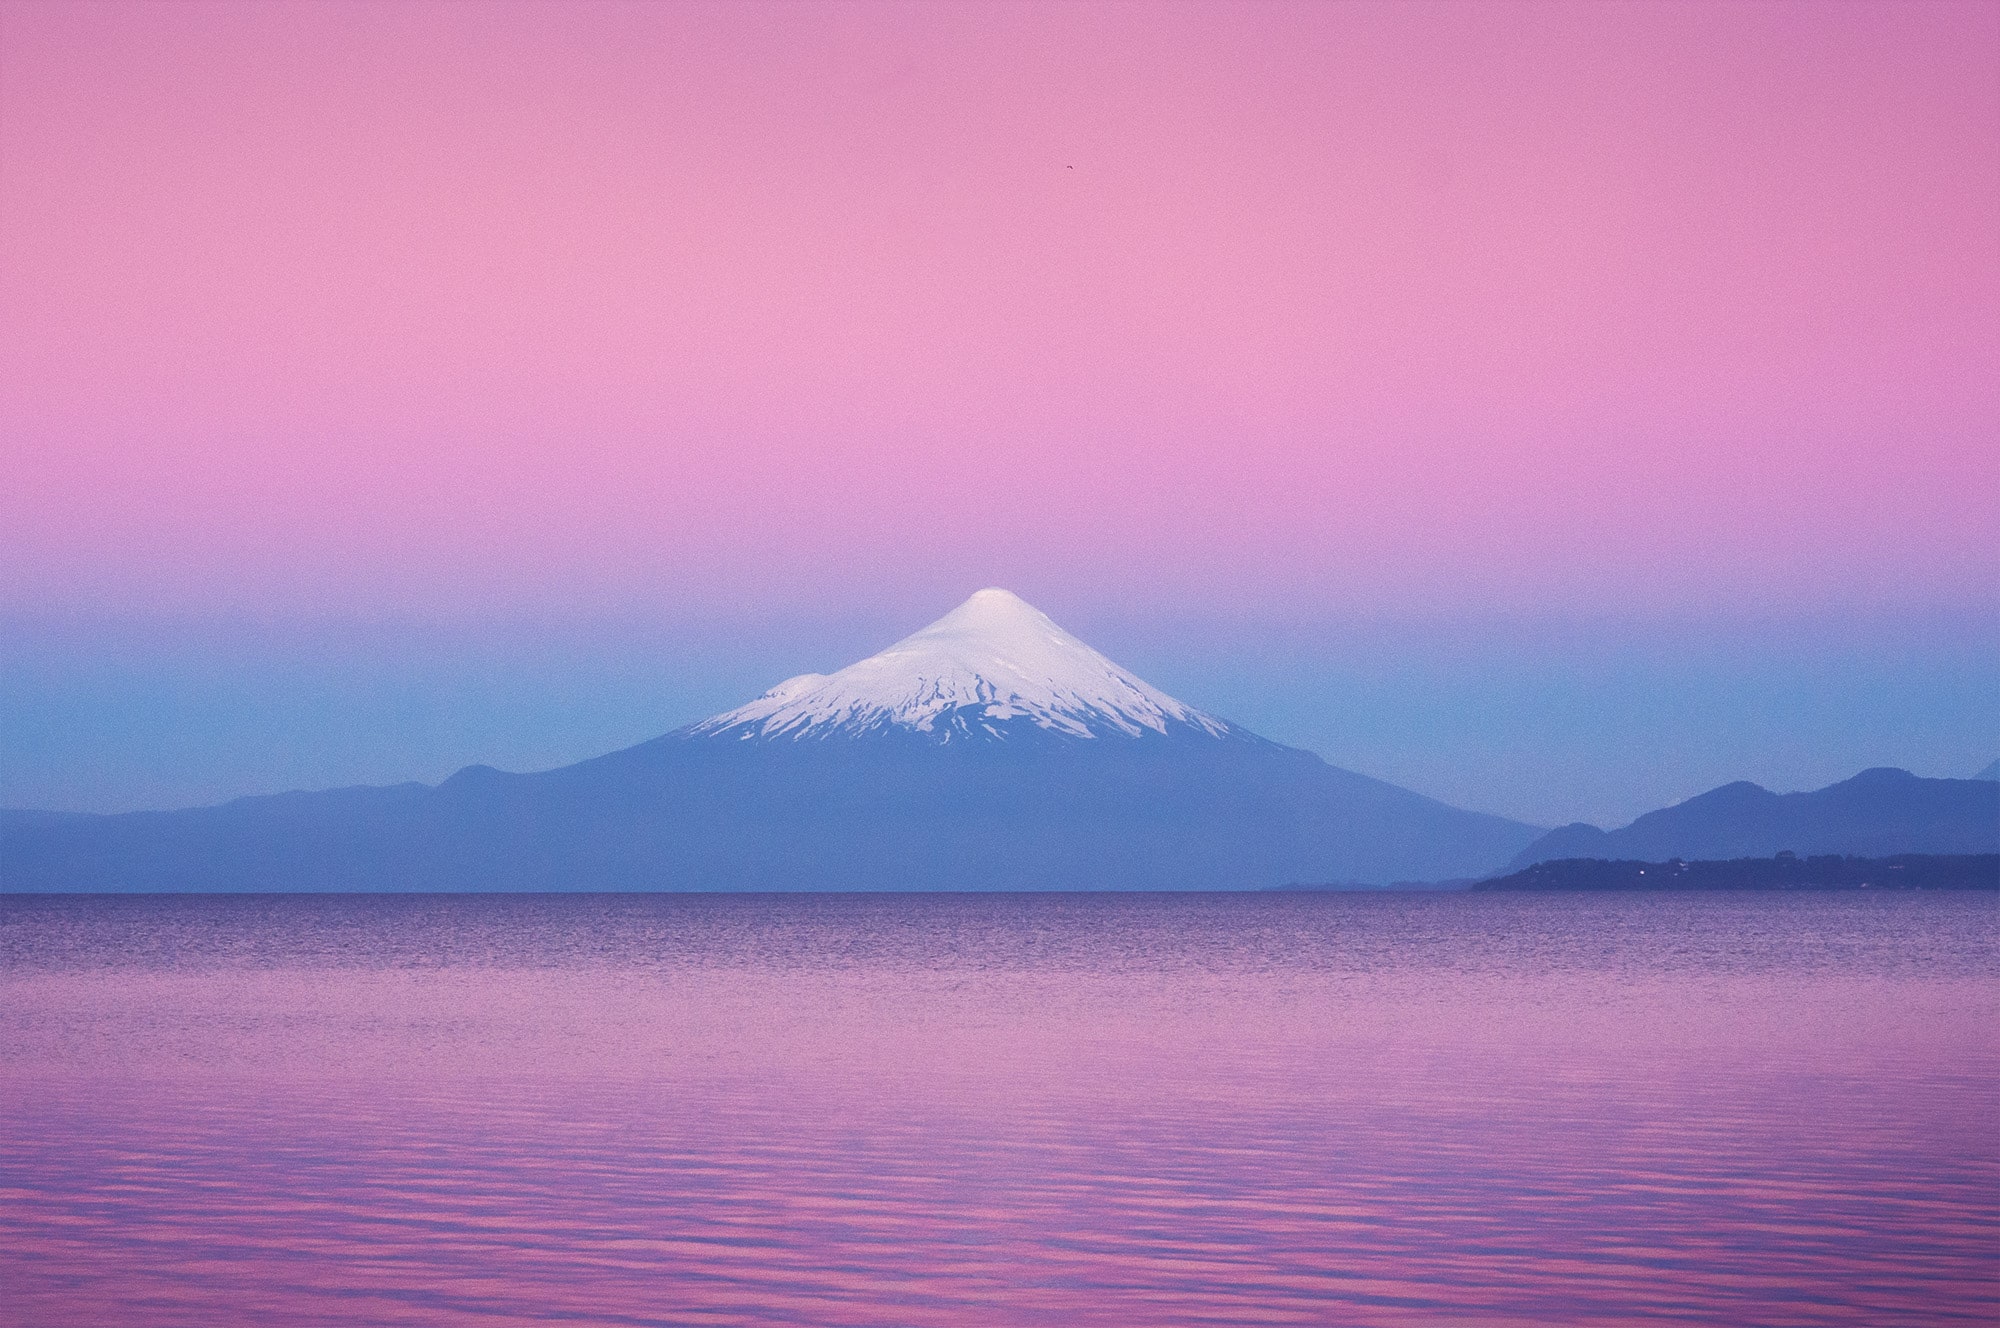 Journey into the captivating world of landscape photography with this stunning image of the Osorno Volcano at a breathtaking pink sky sunset in Puerto Varas, Chile. Skillfully captured by renowned Swiss photographer Jennifer Esseiva, this mesmerizing photograph showcases the iconic silhouette of the Osorno volcano against the vibrant hues of the evening sky. Immerse yourself in the natural beauty of this Chilean gem as captured through Esseiva's lens, revealing the picturesque charm of Puerto Varas. Experience the magic of the golden hour with the expertly composed and visually striking portrayal of the Osorno volcano, beautifully rendered in this exquisite sunset scene by Jennifer Esseiva, a master of her craft.